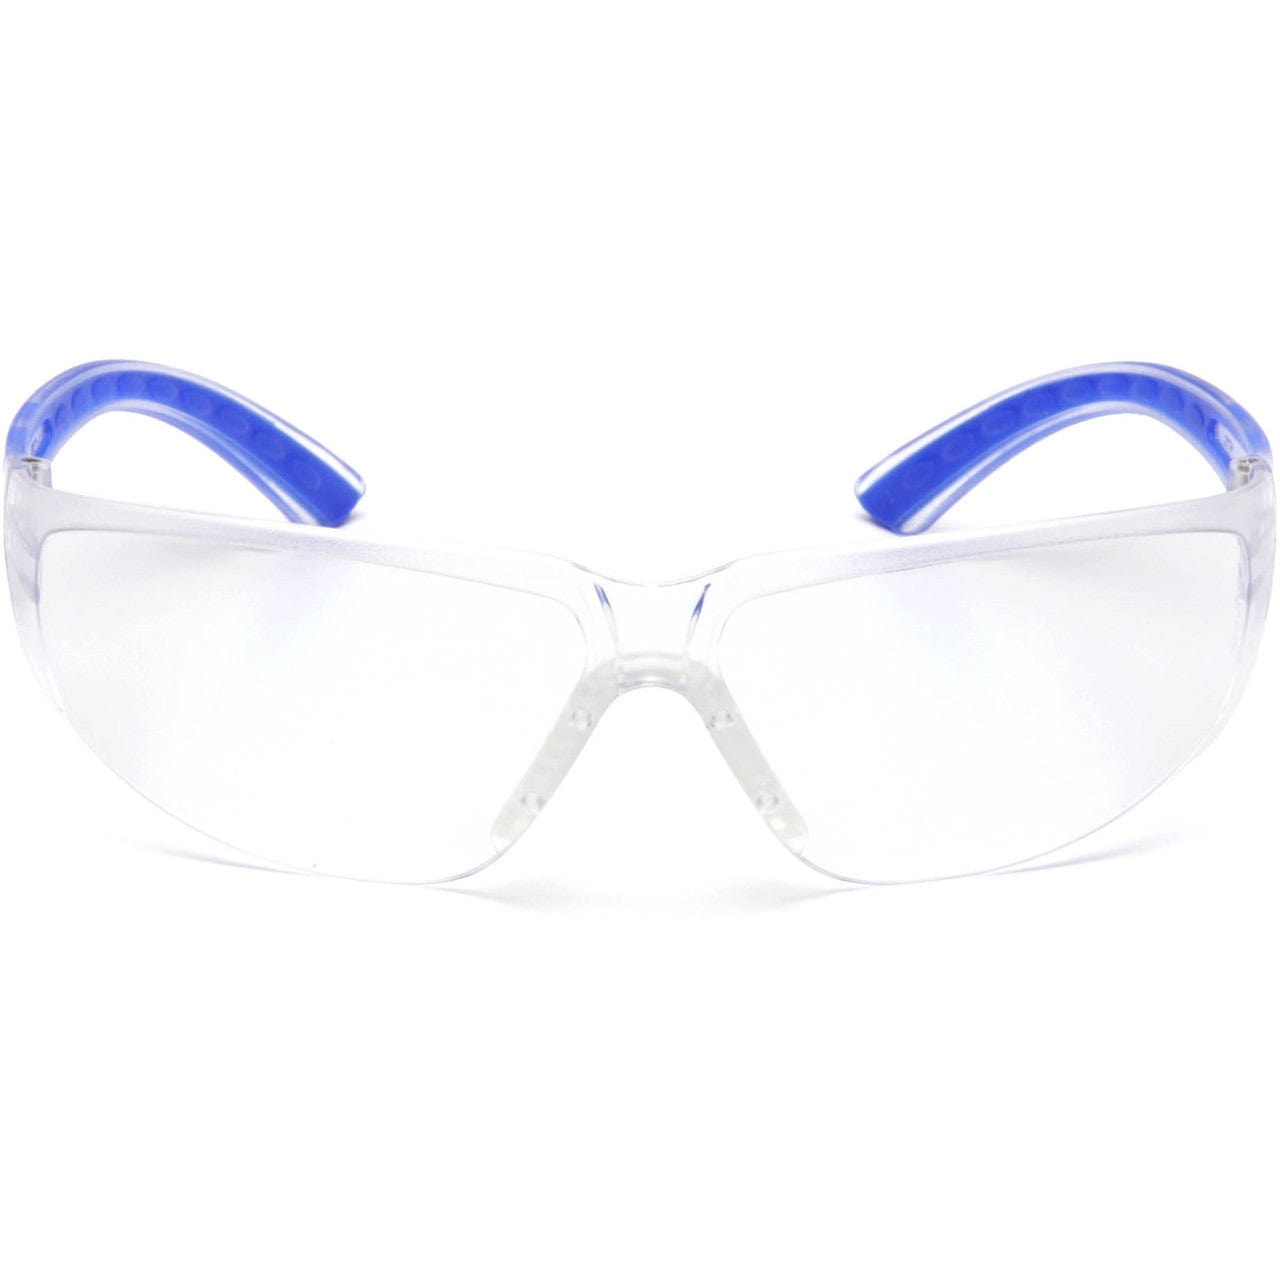 Pyramex Cortez Safety Glasses Navy Temples Clear Lens SN3610S Front